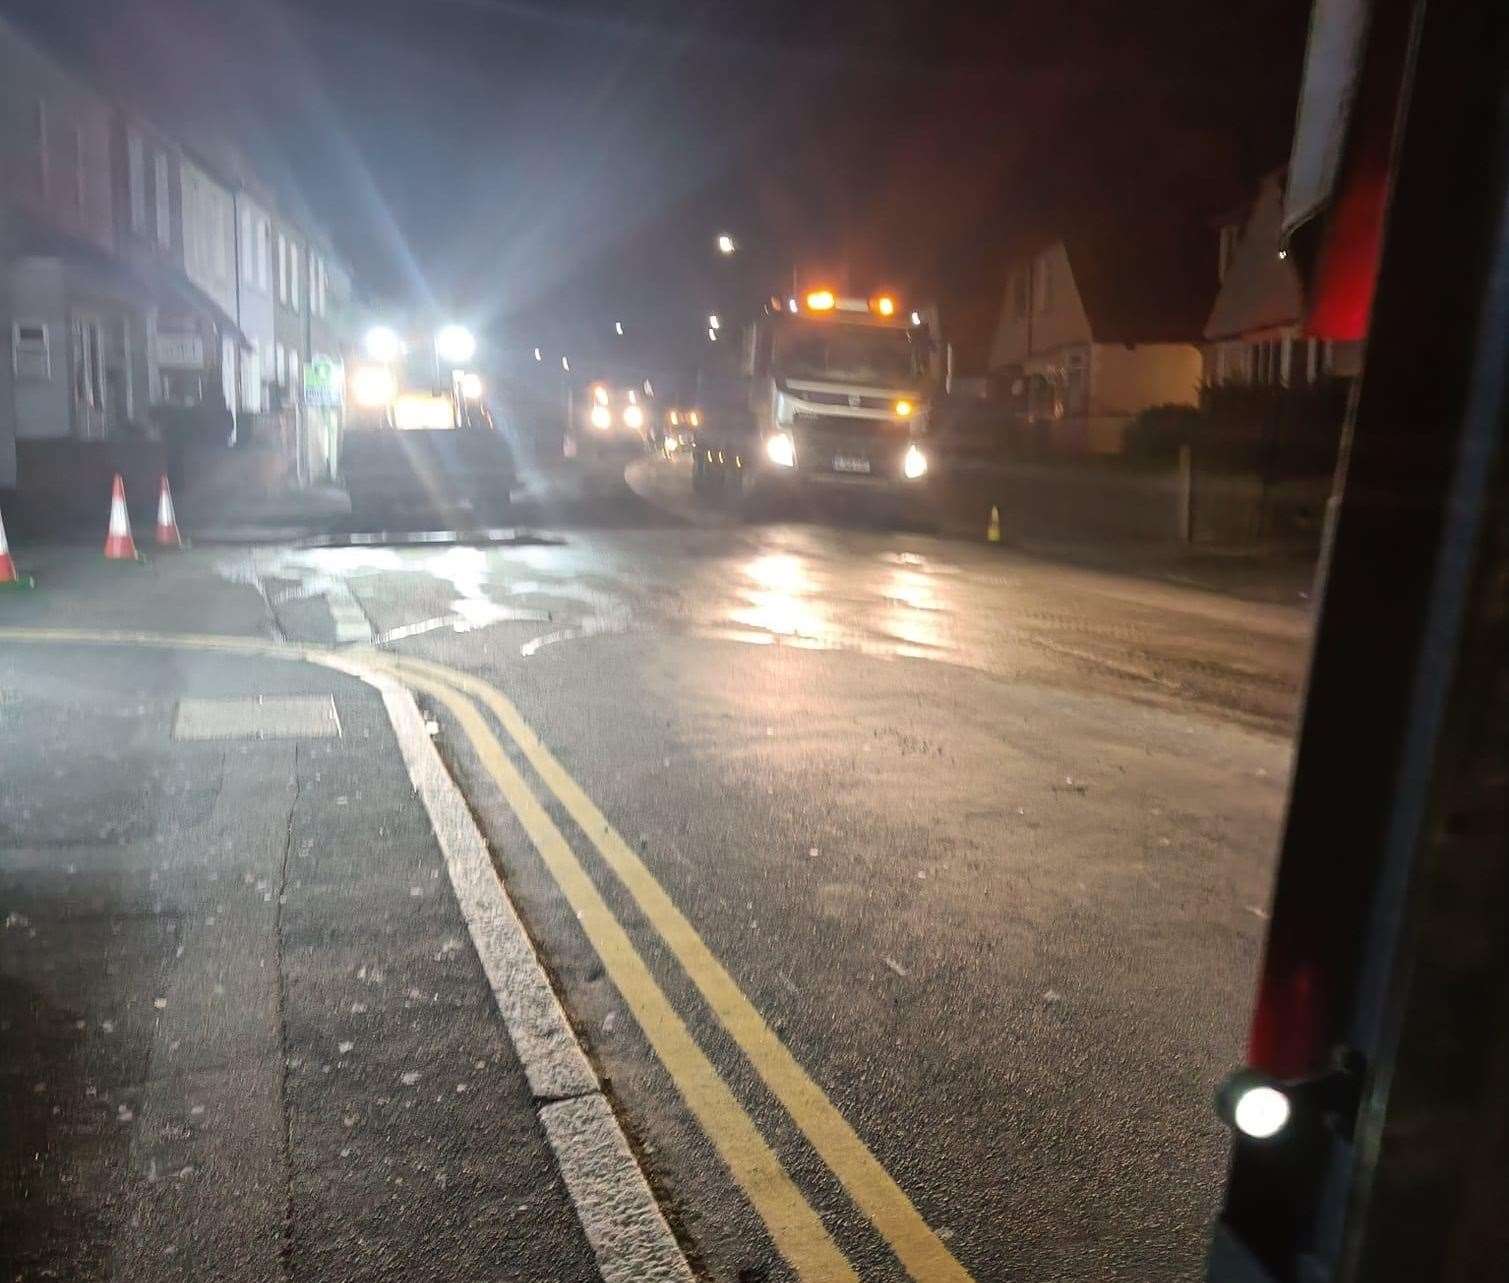 St Vincent's Road in Dartford was closed for resurfacing